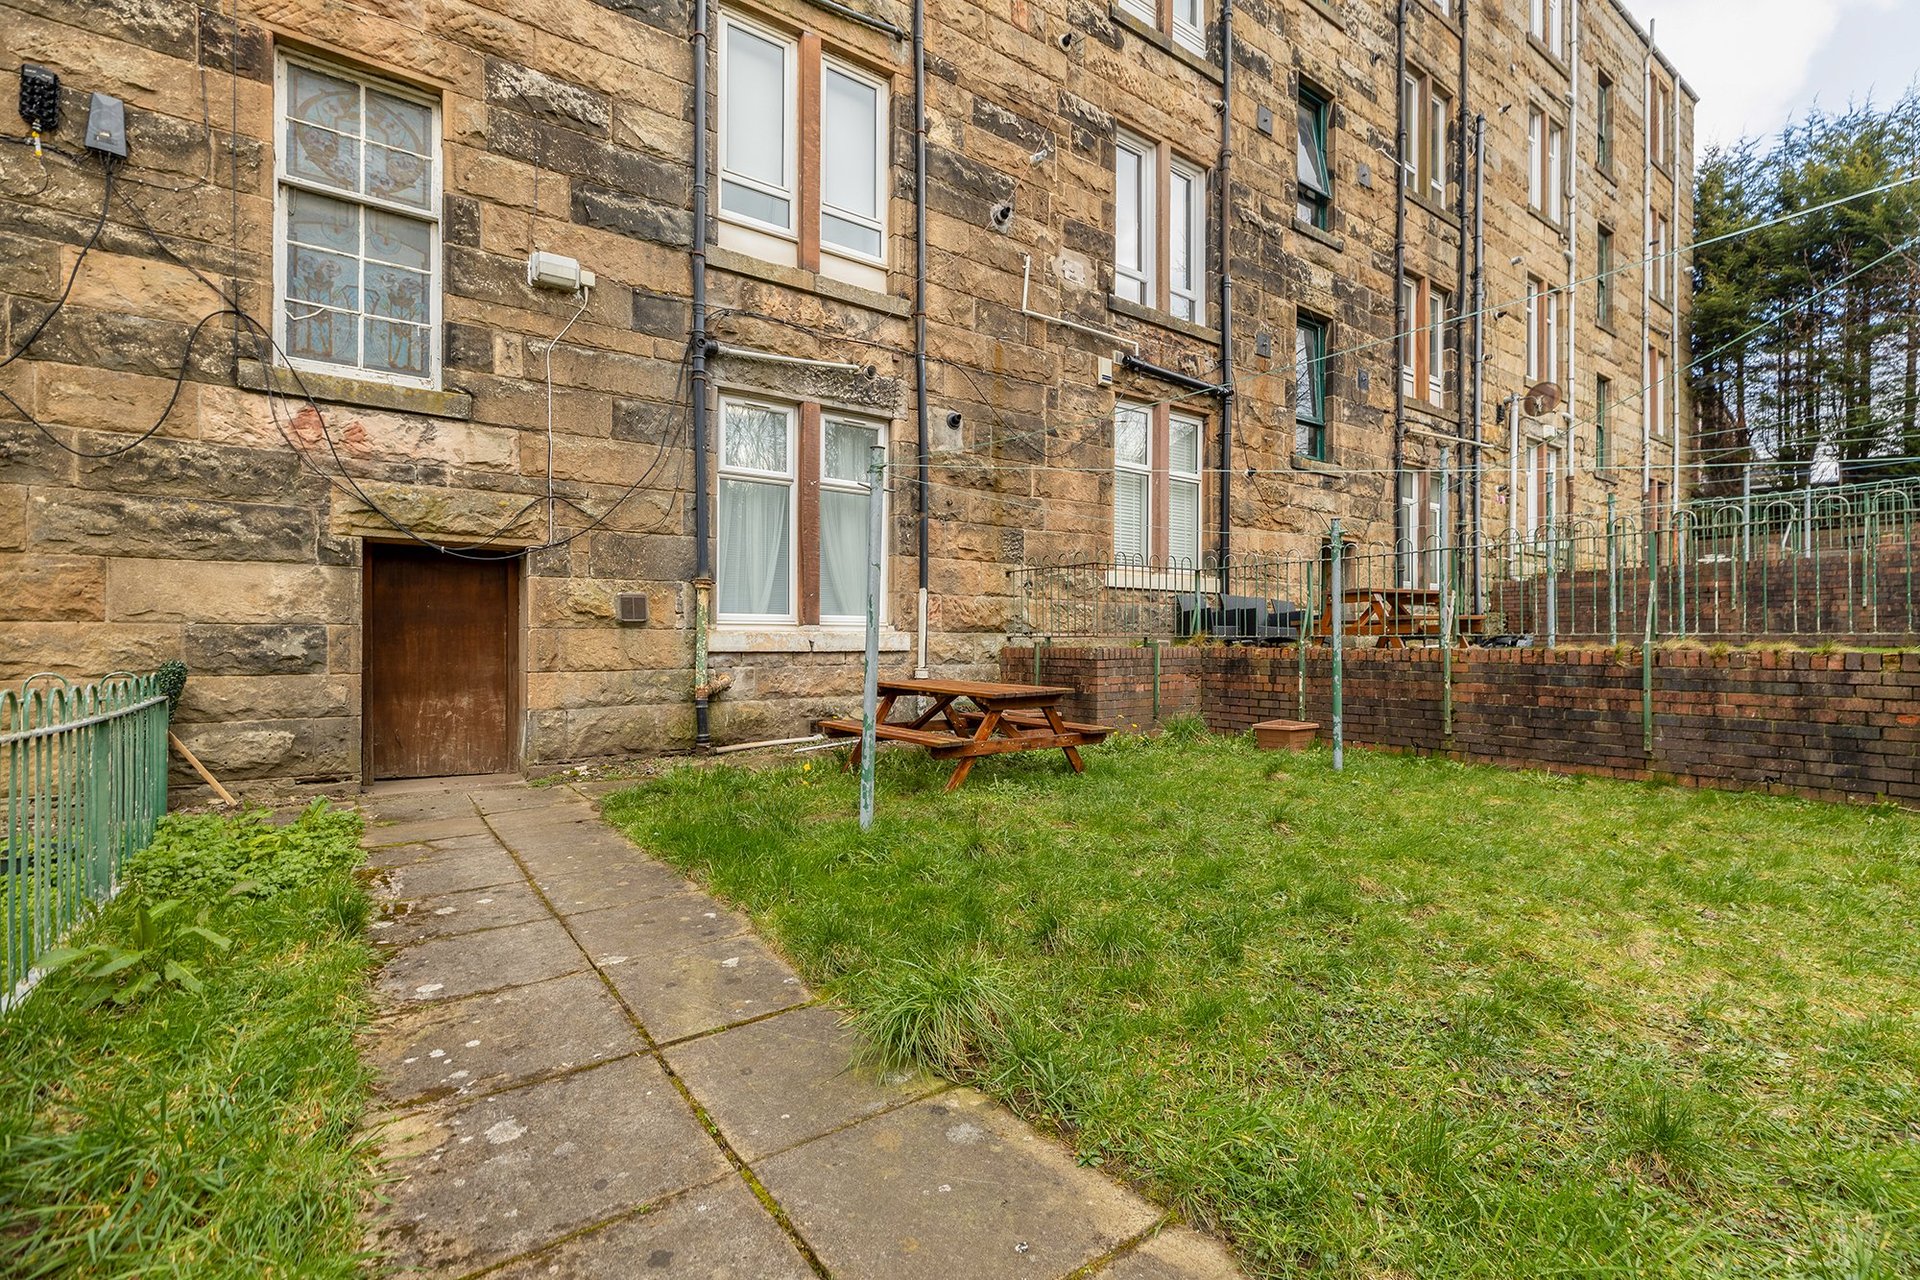 2/1, 79 Tankerland Road, Cathcart, Glasgow, G44 4EW - Picture #2